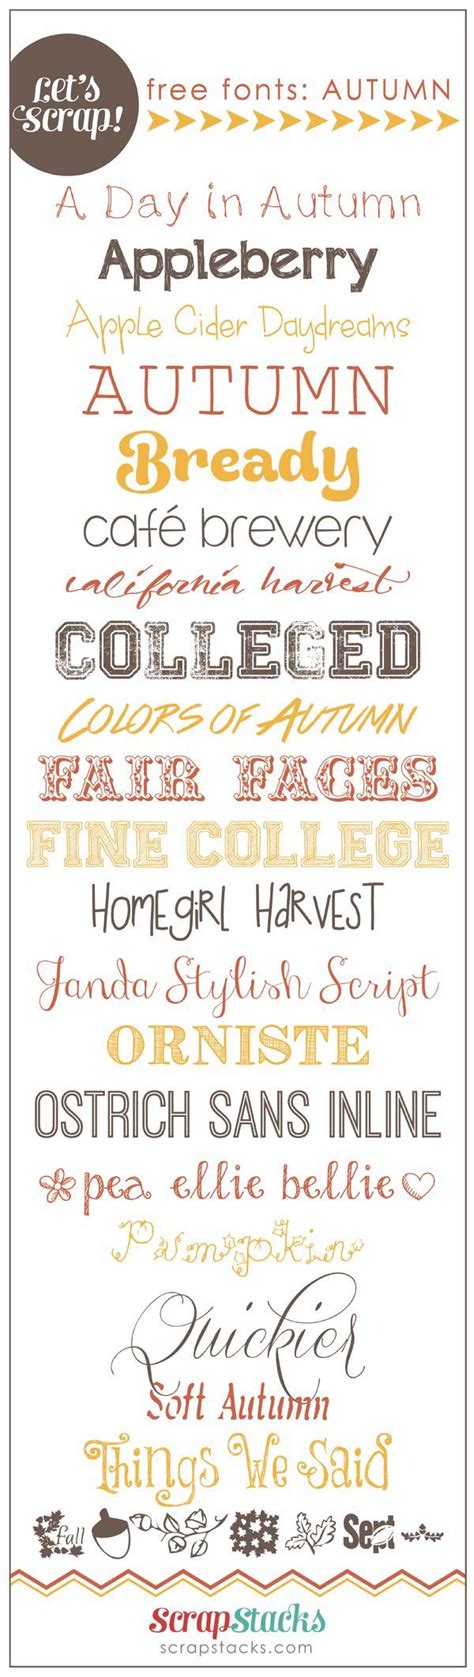 Free Autumn Fonts For Scrapbooking From Scrap Stacks Scrapbook Fonts